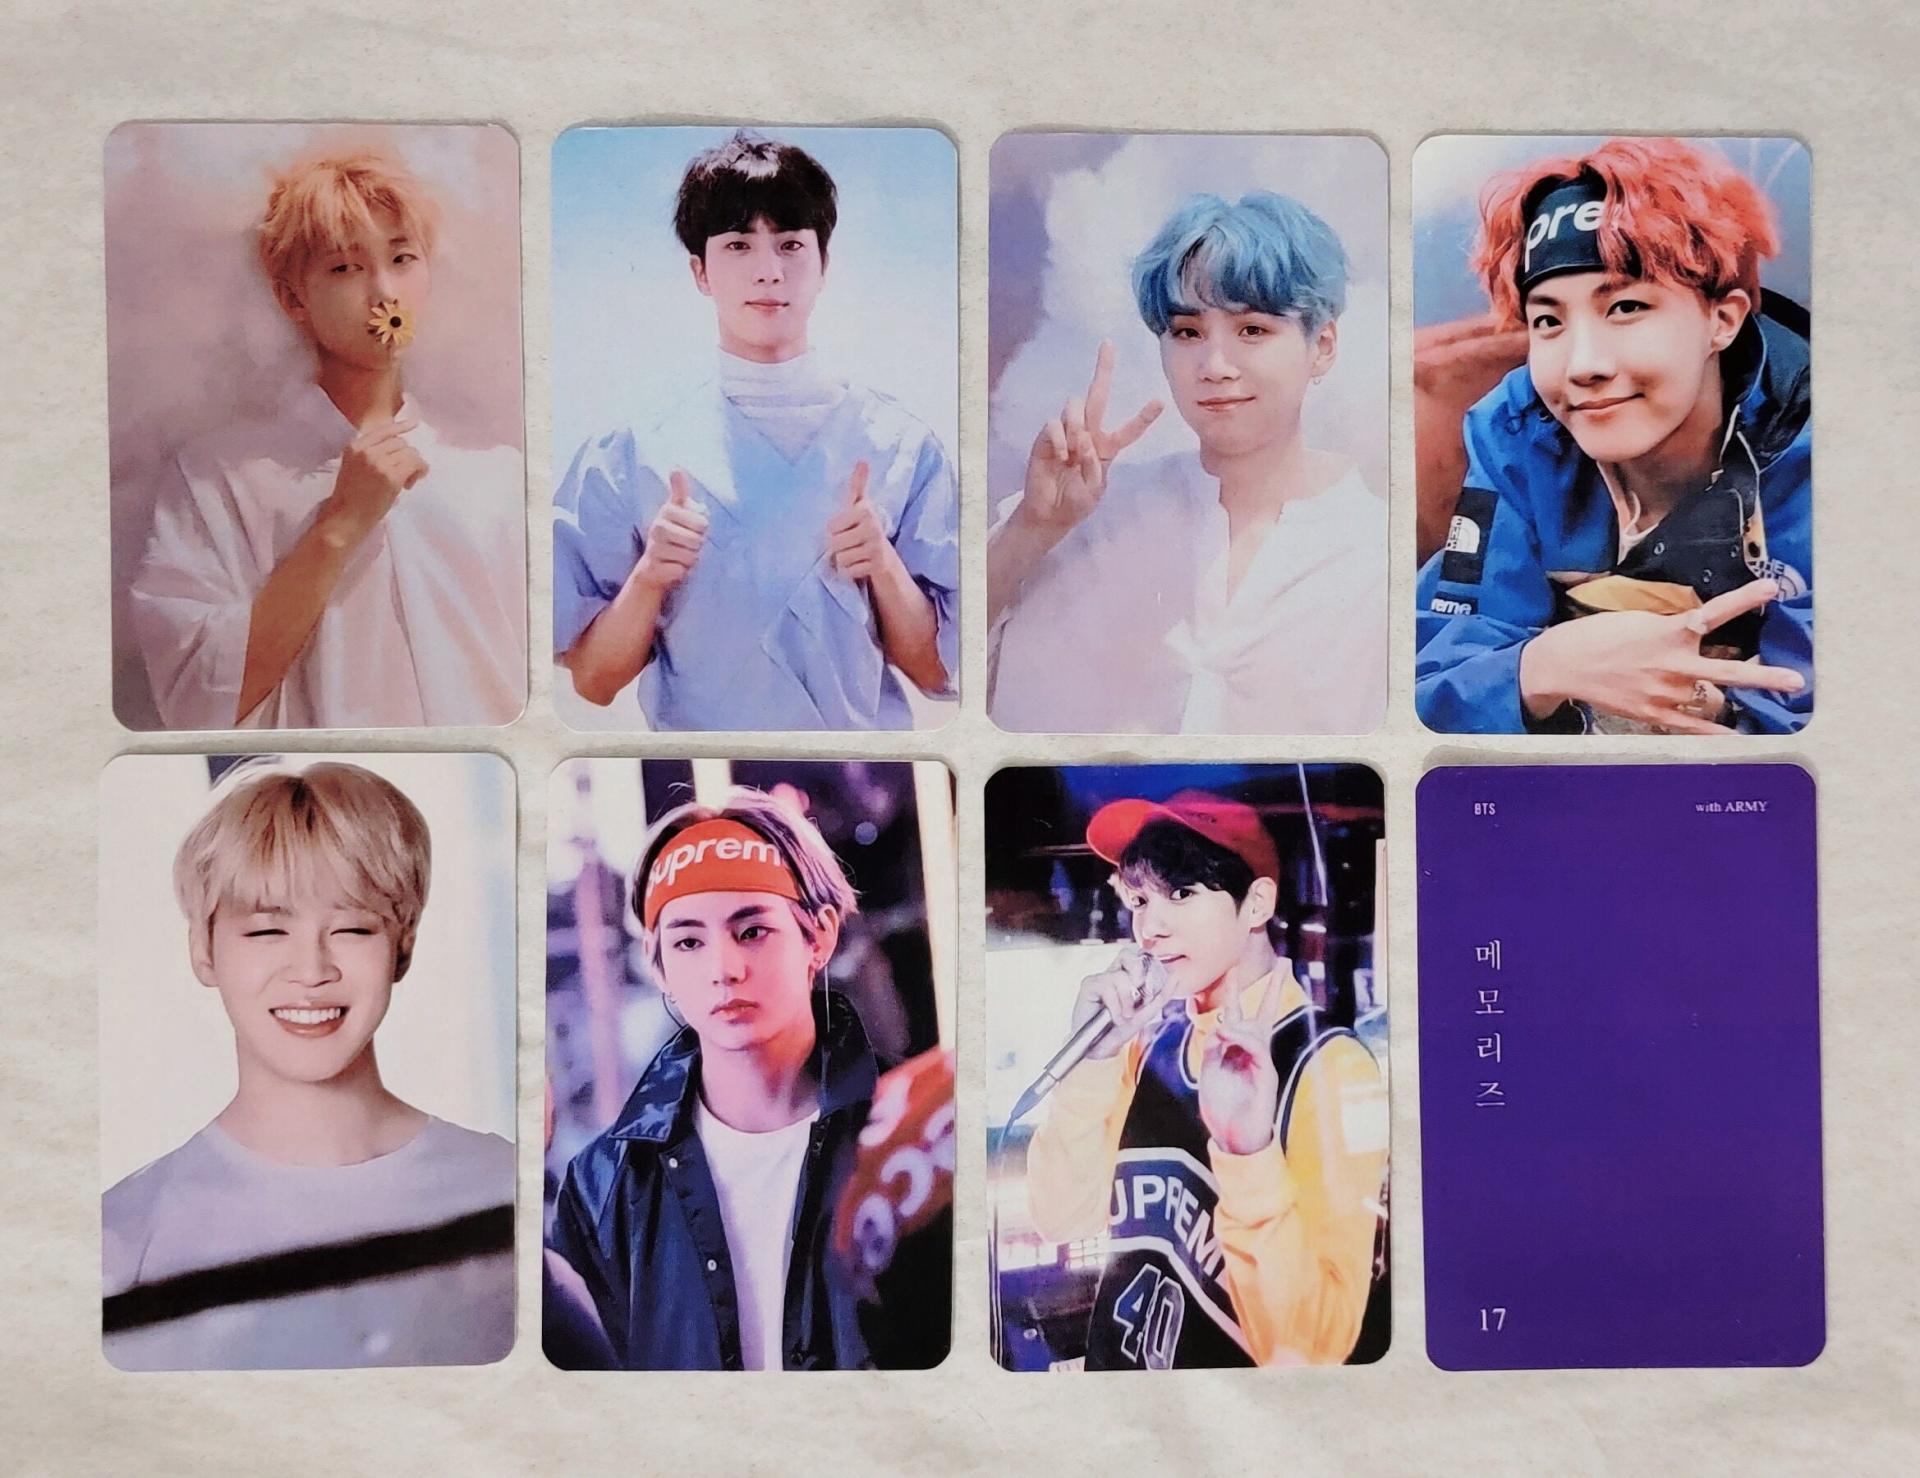 BTS Memories of 2017 DVD Photocards | Army Corner Store